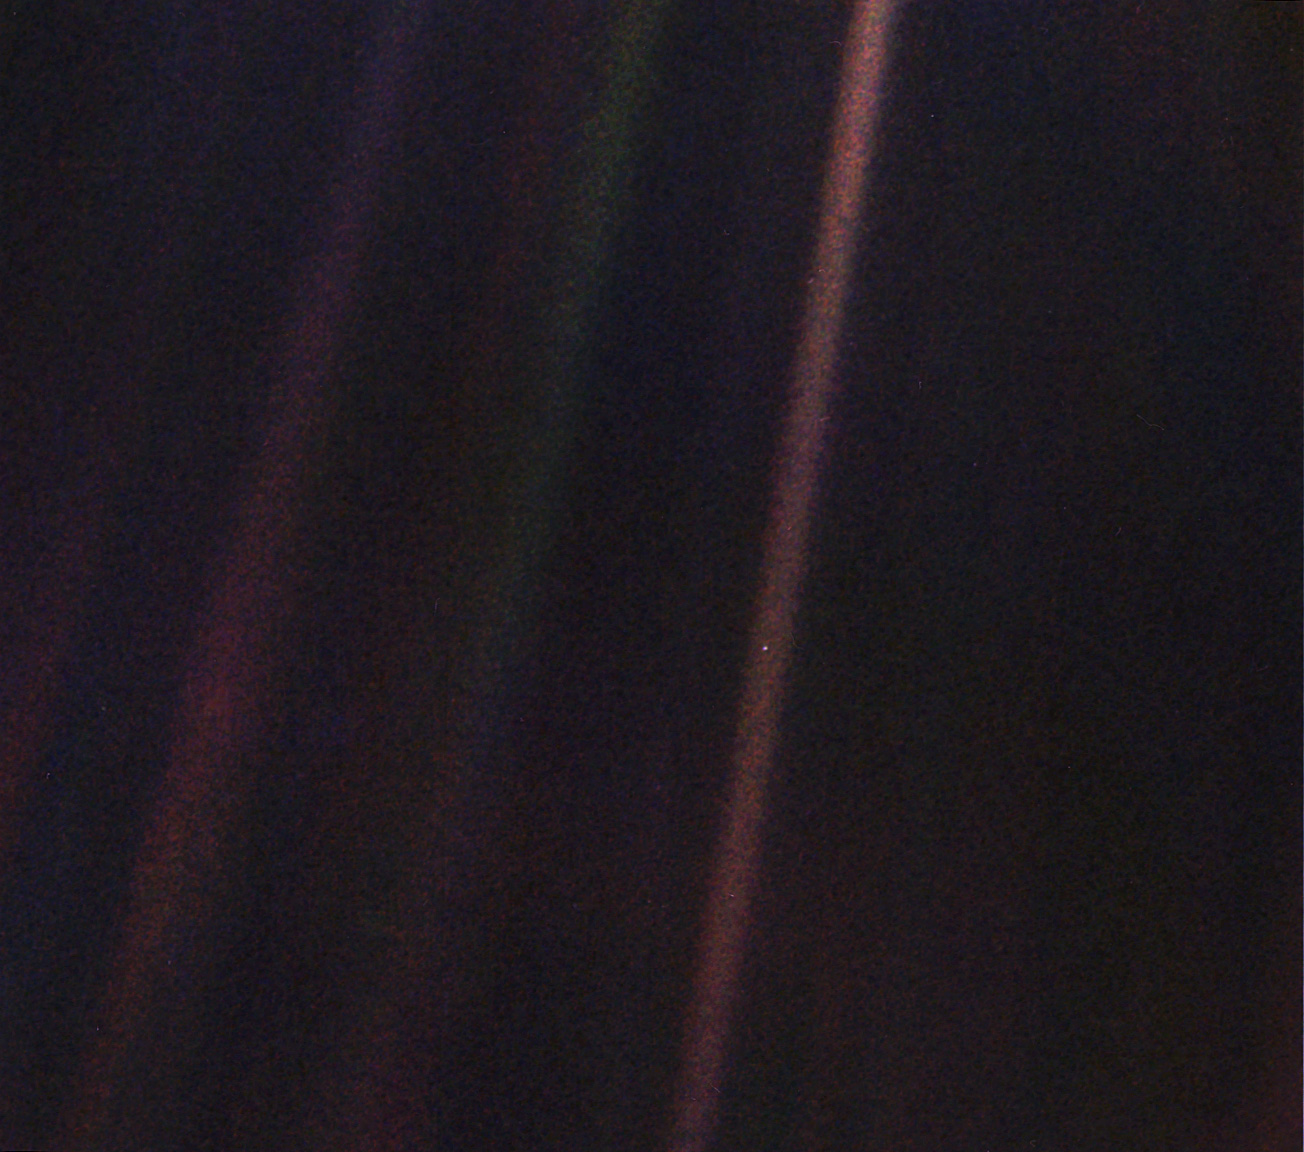 A photograph taken from the spacecraft Voyager as it turns to face Earth one final time. In this photo, Earth is a tiny speck of light, hanging in the void.